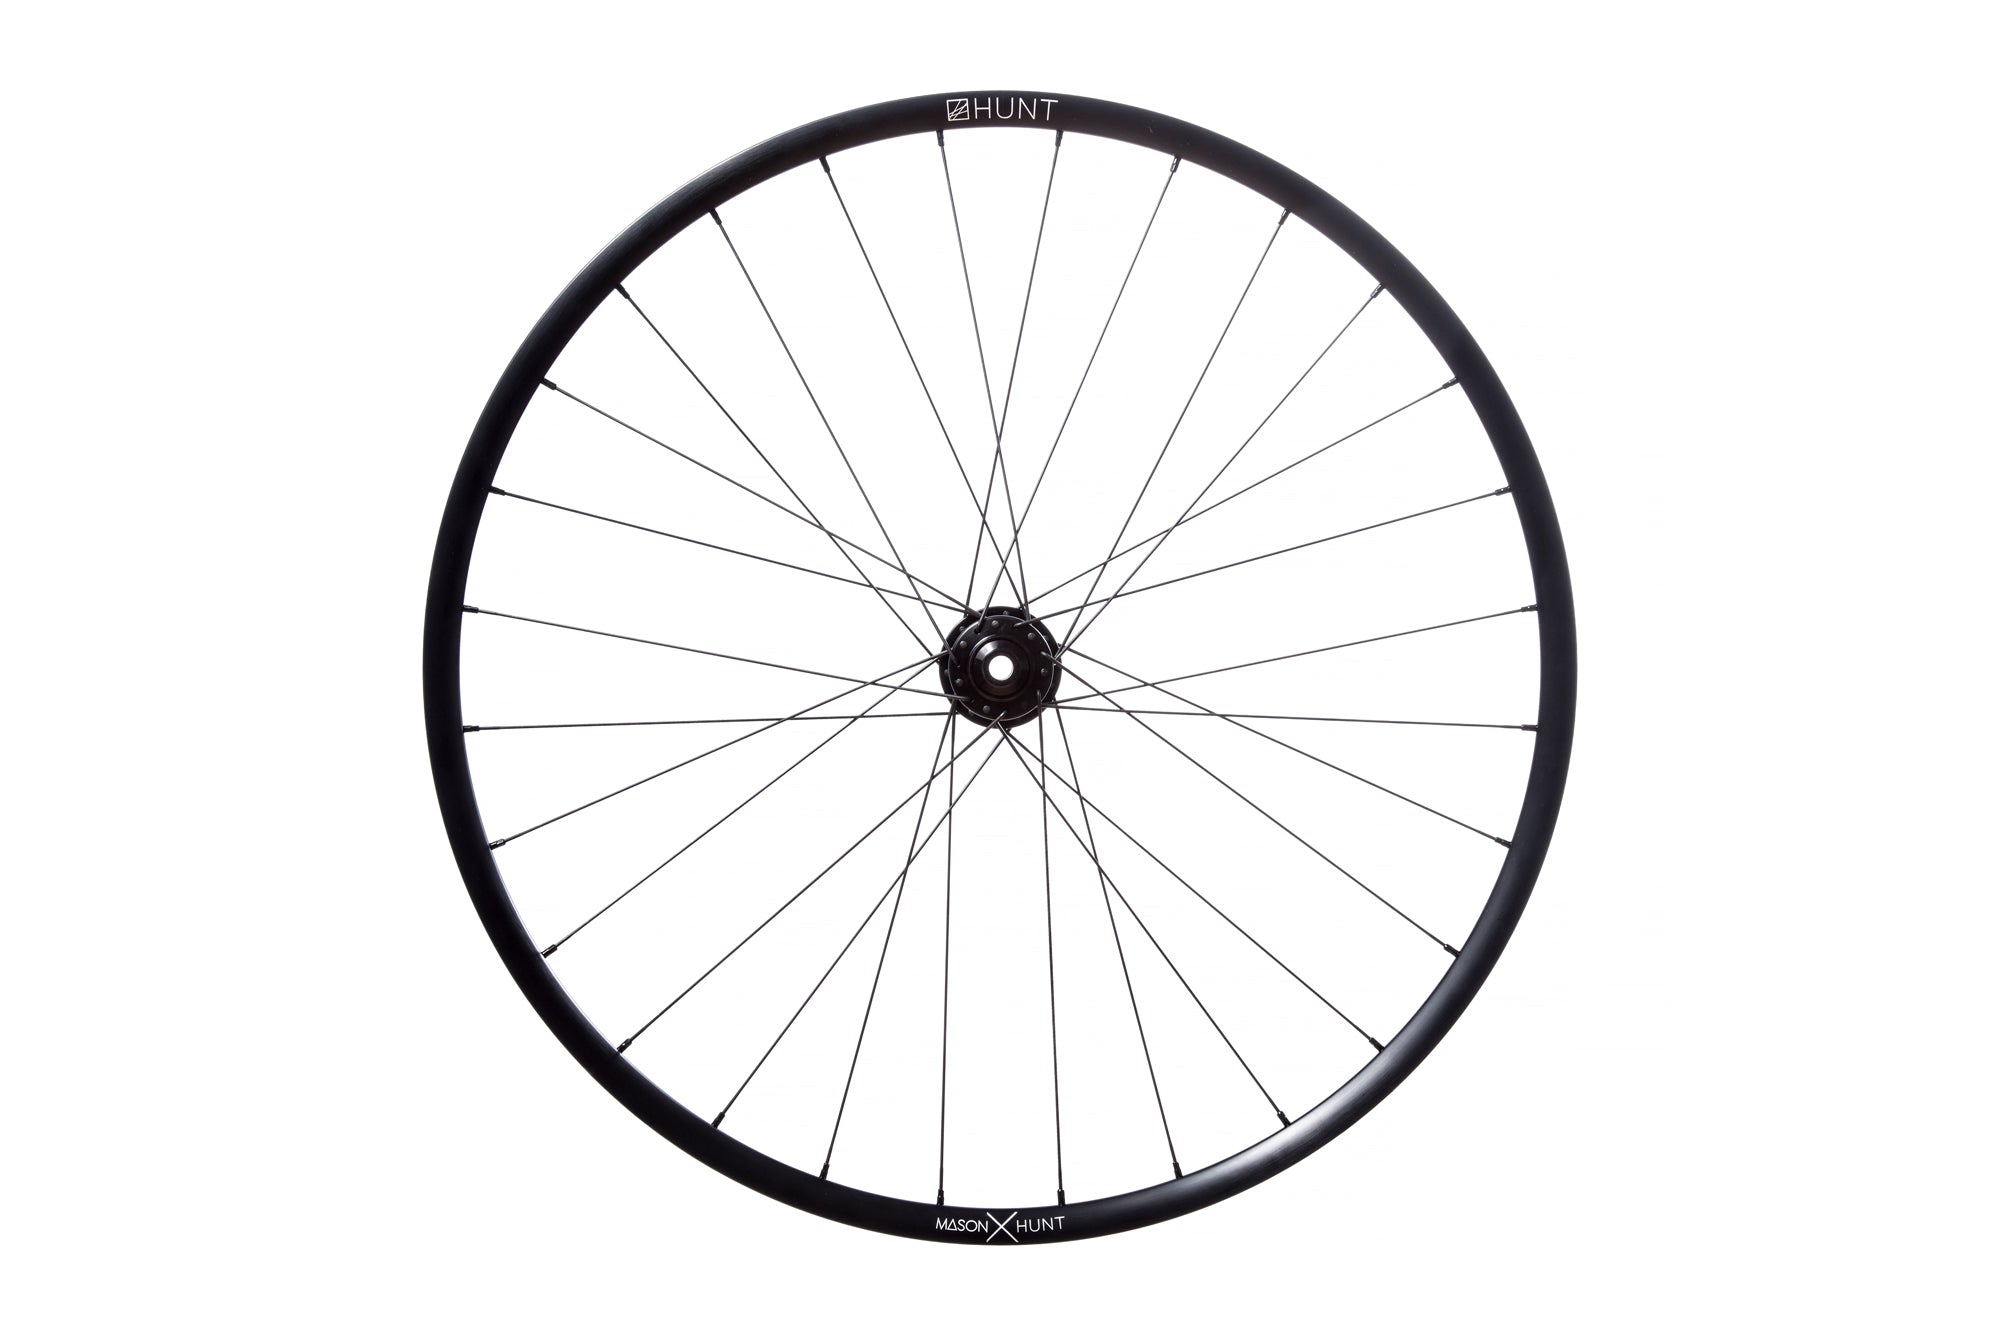 <h1>Rims</h1><i>Strong and light 6066-T6 (+34% tensile strength vs 6061-T6) heat-treated rim features an asymmetric shape which is inverted from front to rear to provide balanced higher spoke tensions meaning your spokes stay tight for longer. The profile is disc-specific, allowing higher-strength to weight as no reinforcement is required for a braking surface. The extra wide rim at 29mm (25mm int) creates a great tyre profile with wider 35c+ tyres, giving excellent grip and lower rolling resistance.</i>